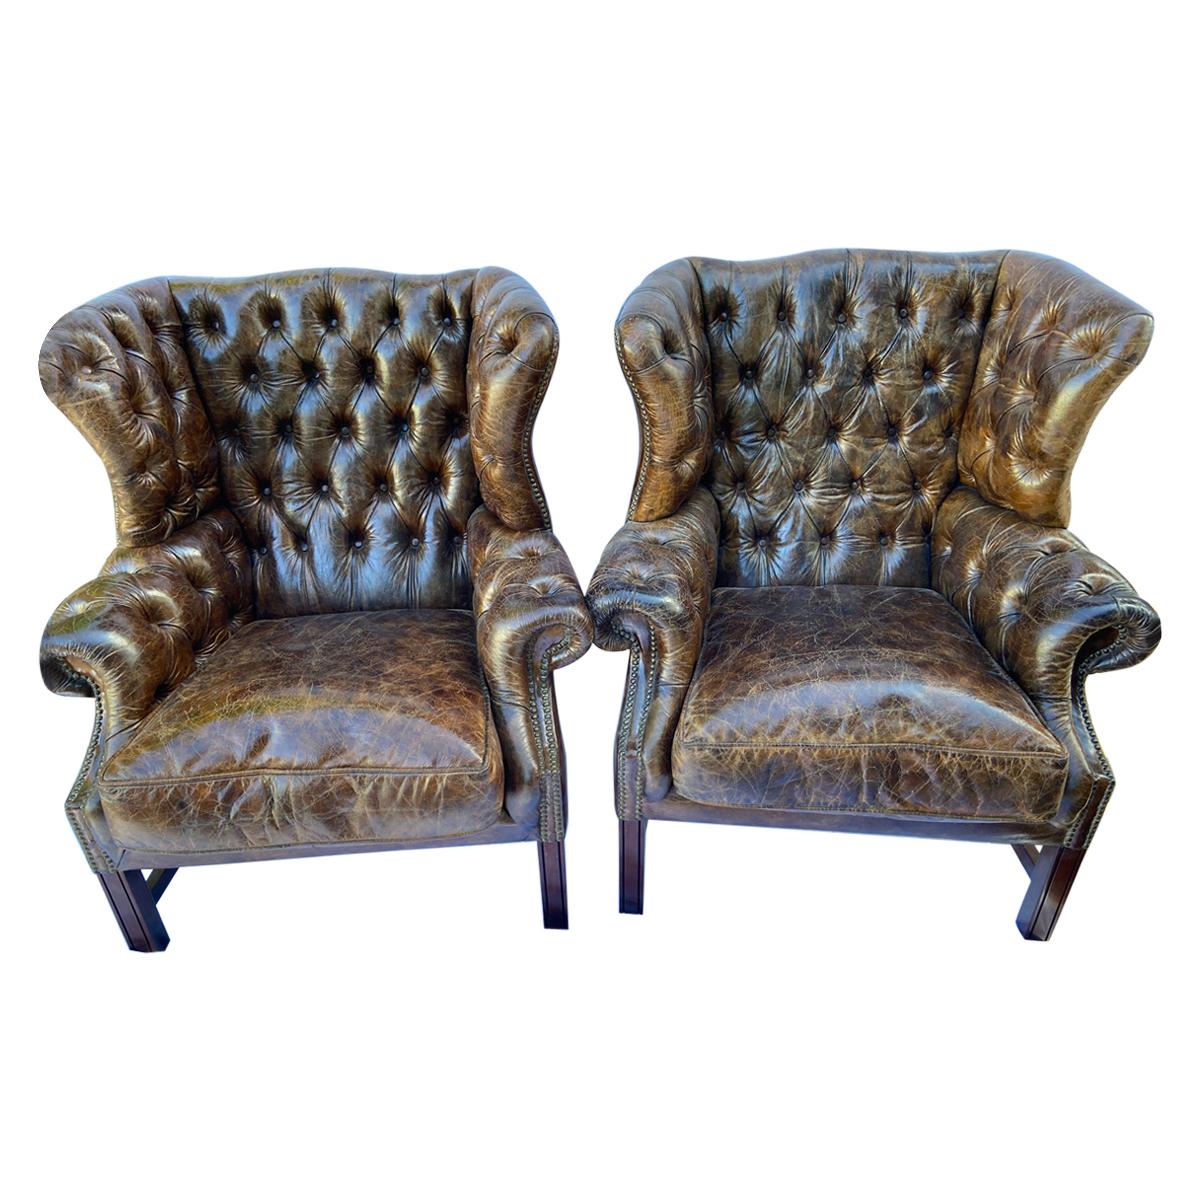 Superb Pair of Vintage Leather Wing-Back Tufted Club Chairs